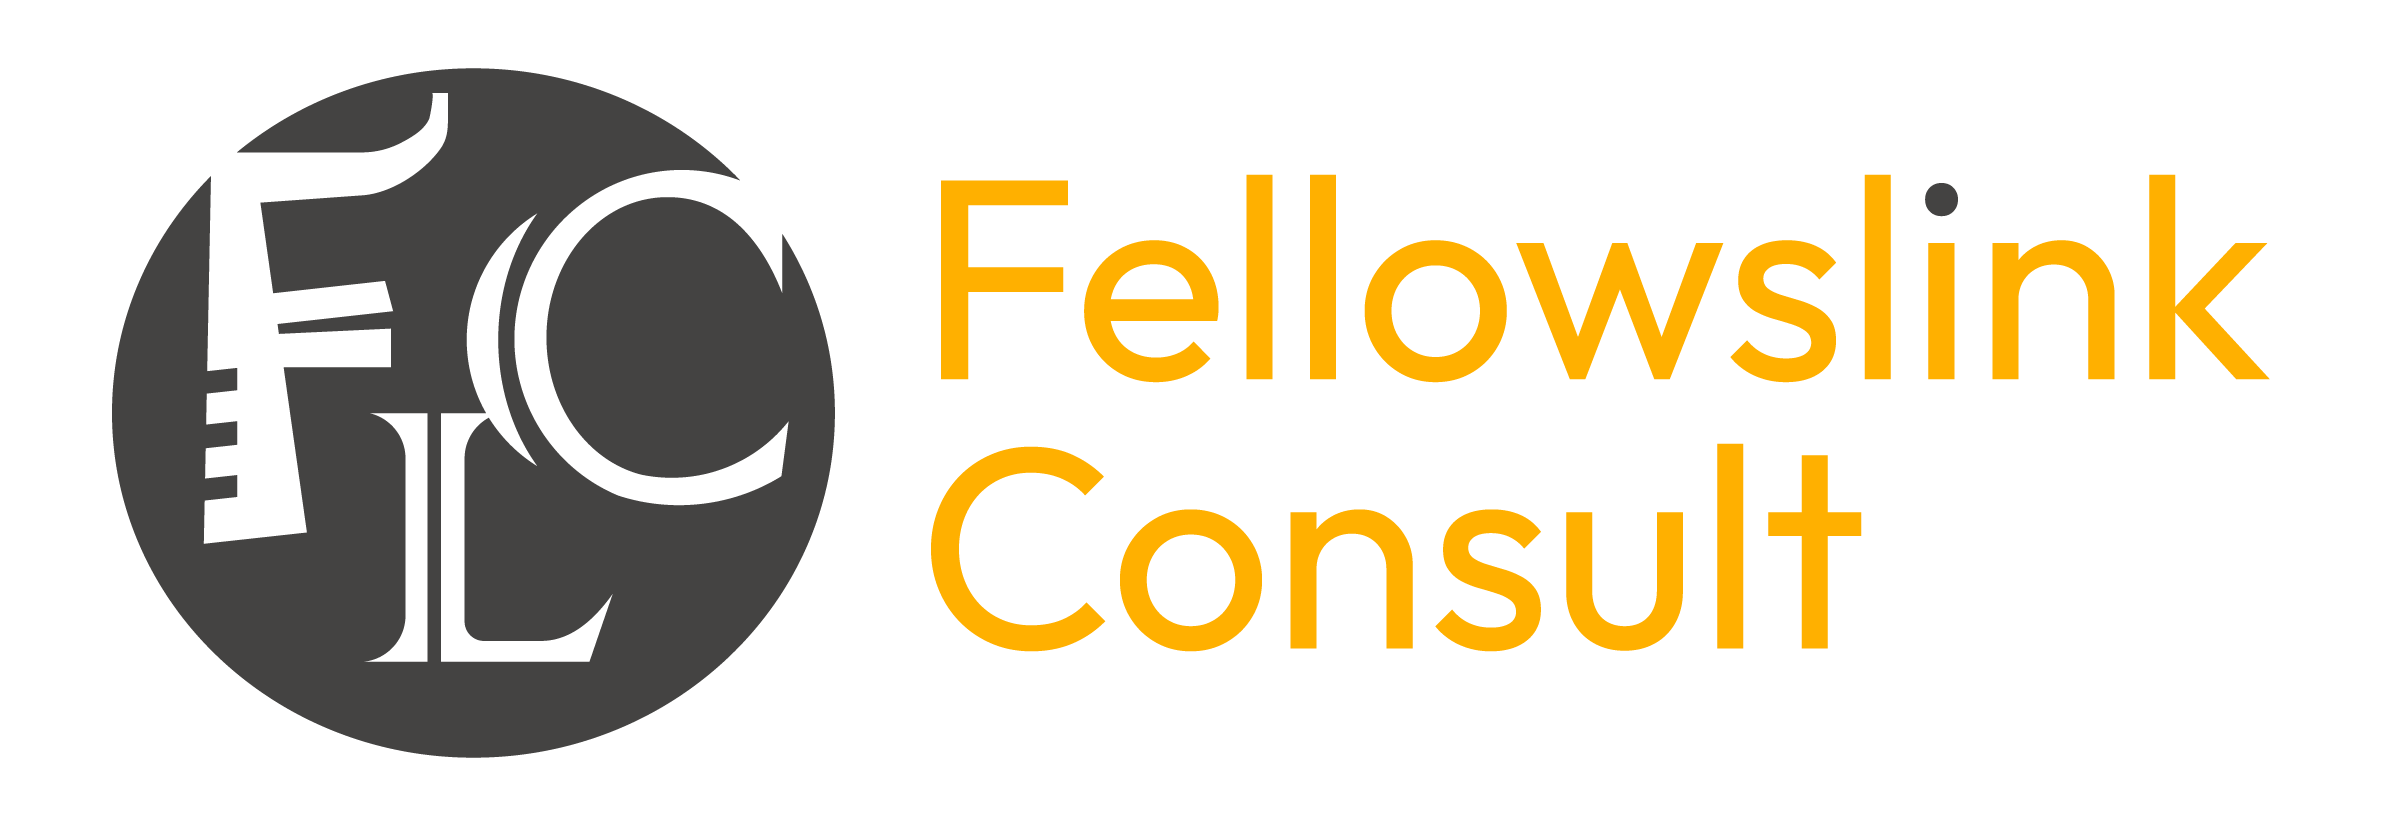 Fellowslink Consults